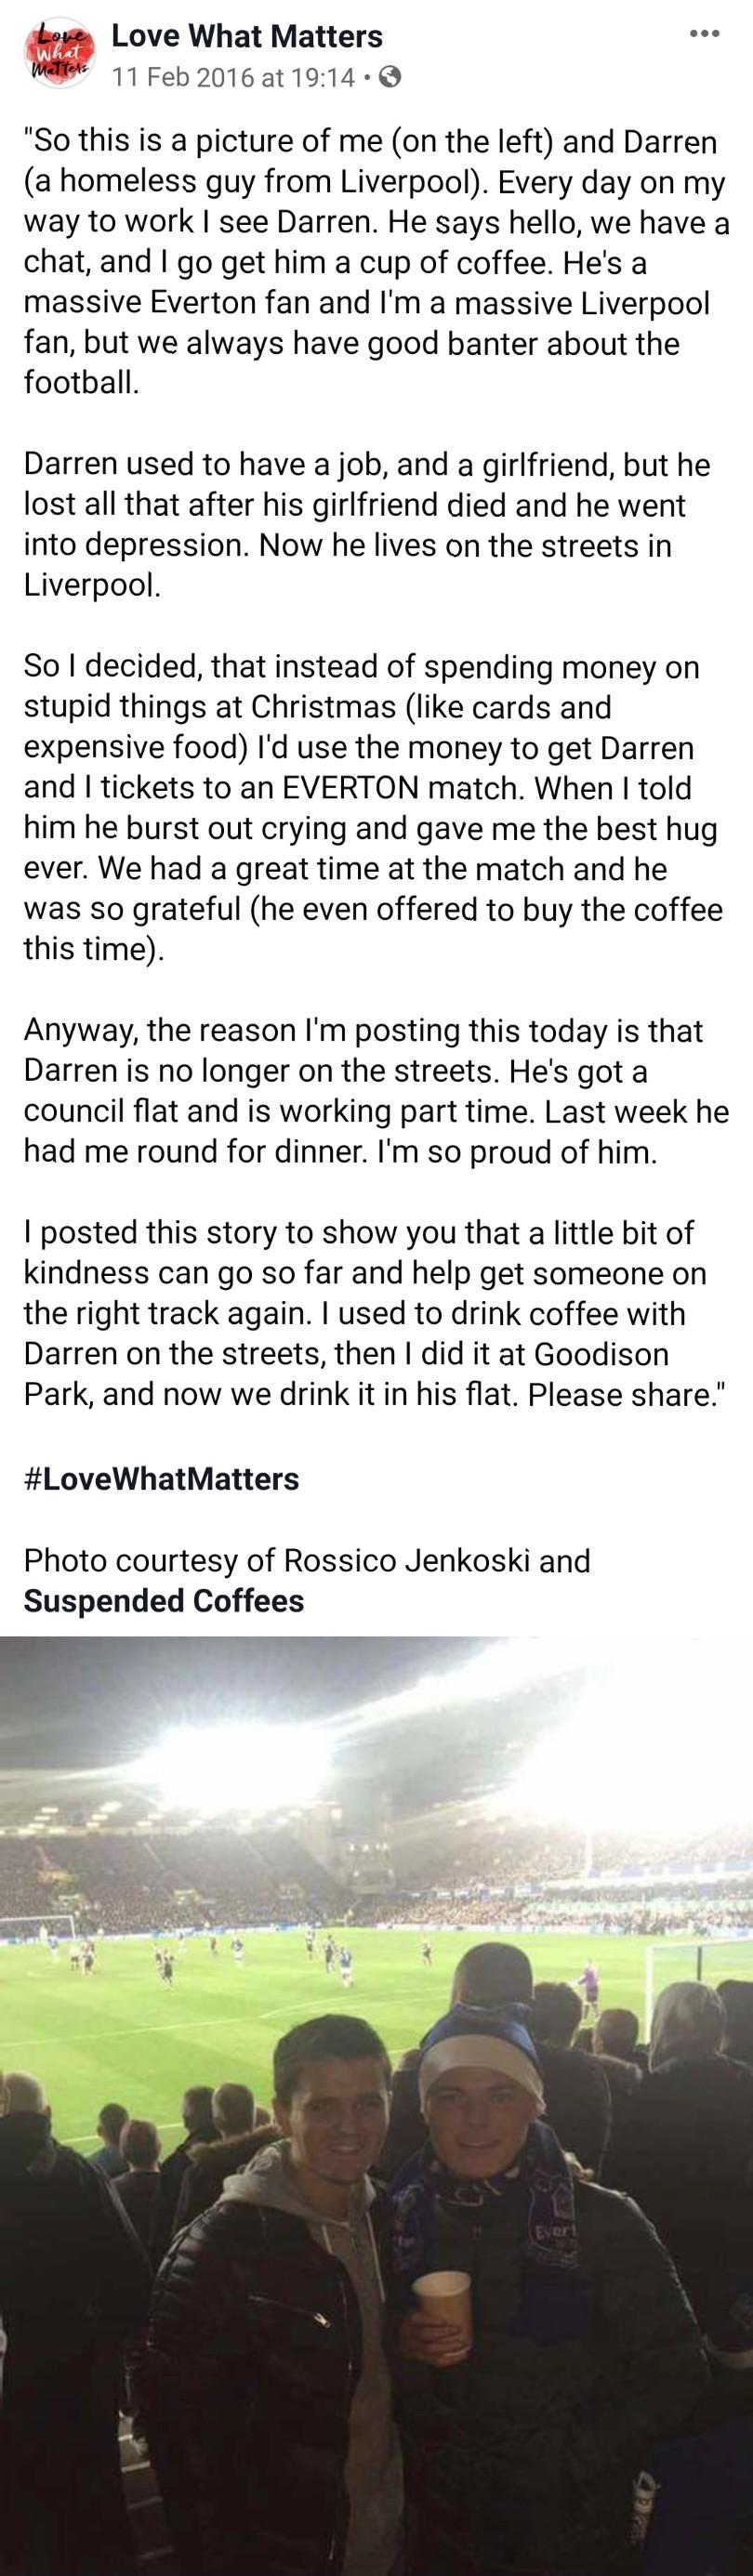 sky - Love What Matters at "So this is a picture of me on the left and Darren a homeless guy from Liverpool. Every day on my way to work I see Darren. He says hello, we have a chat, and I go get him a cup of coffee. He's a massive Everton fan and I'm a ma